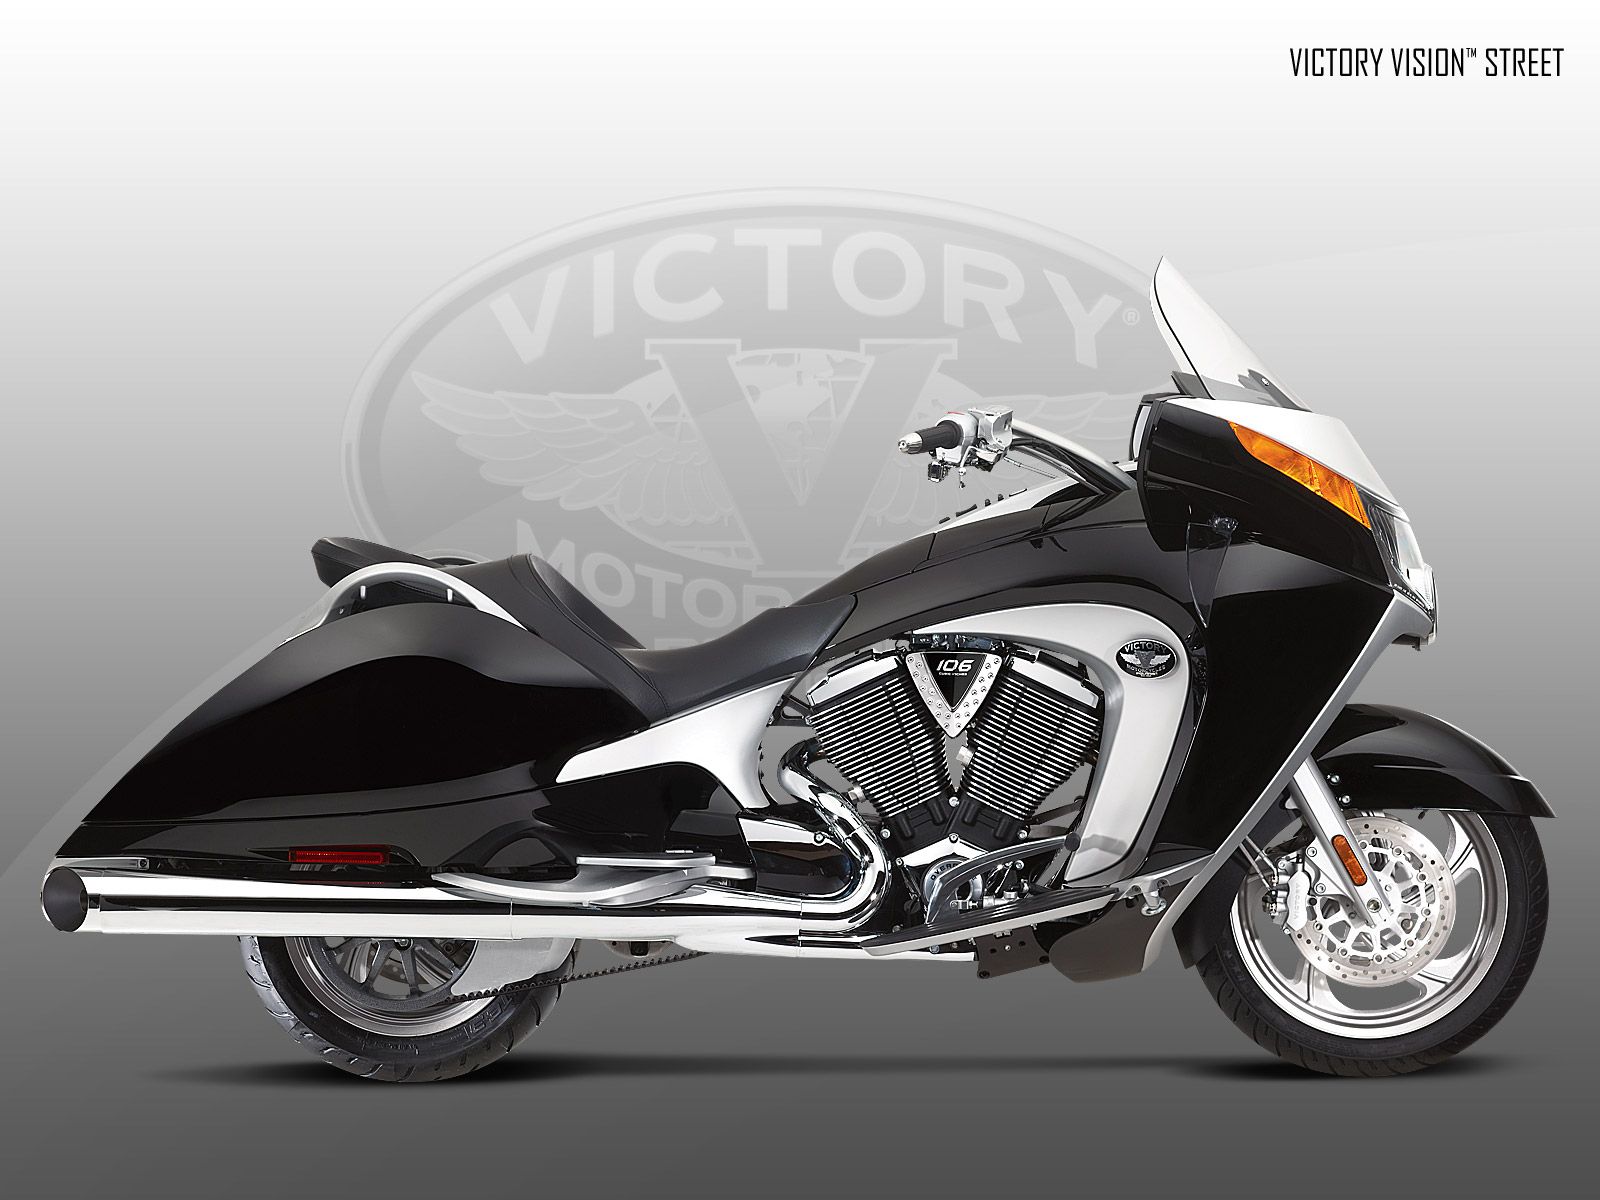  2009 Victory Vision Street